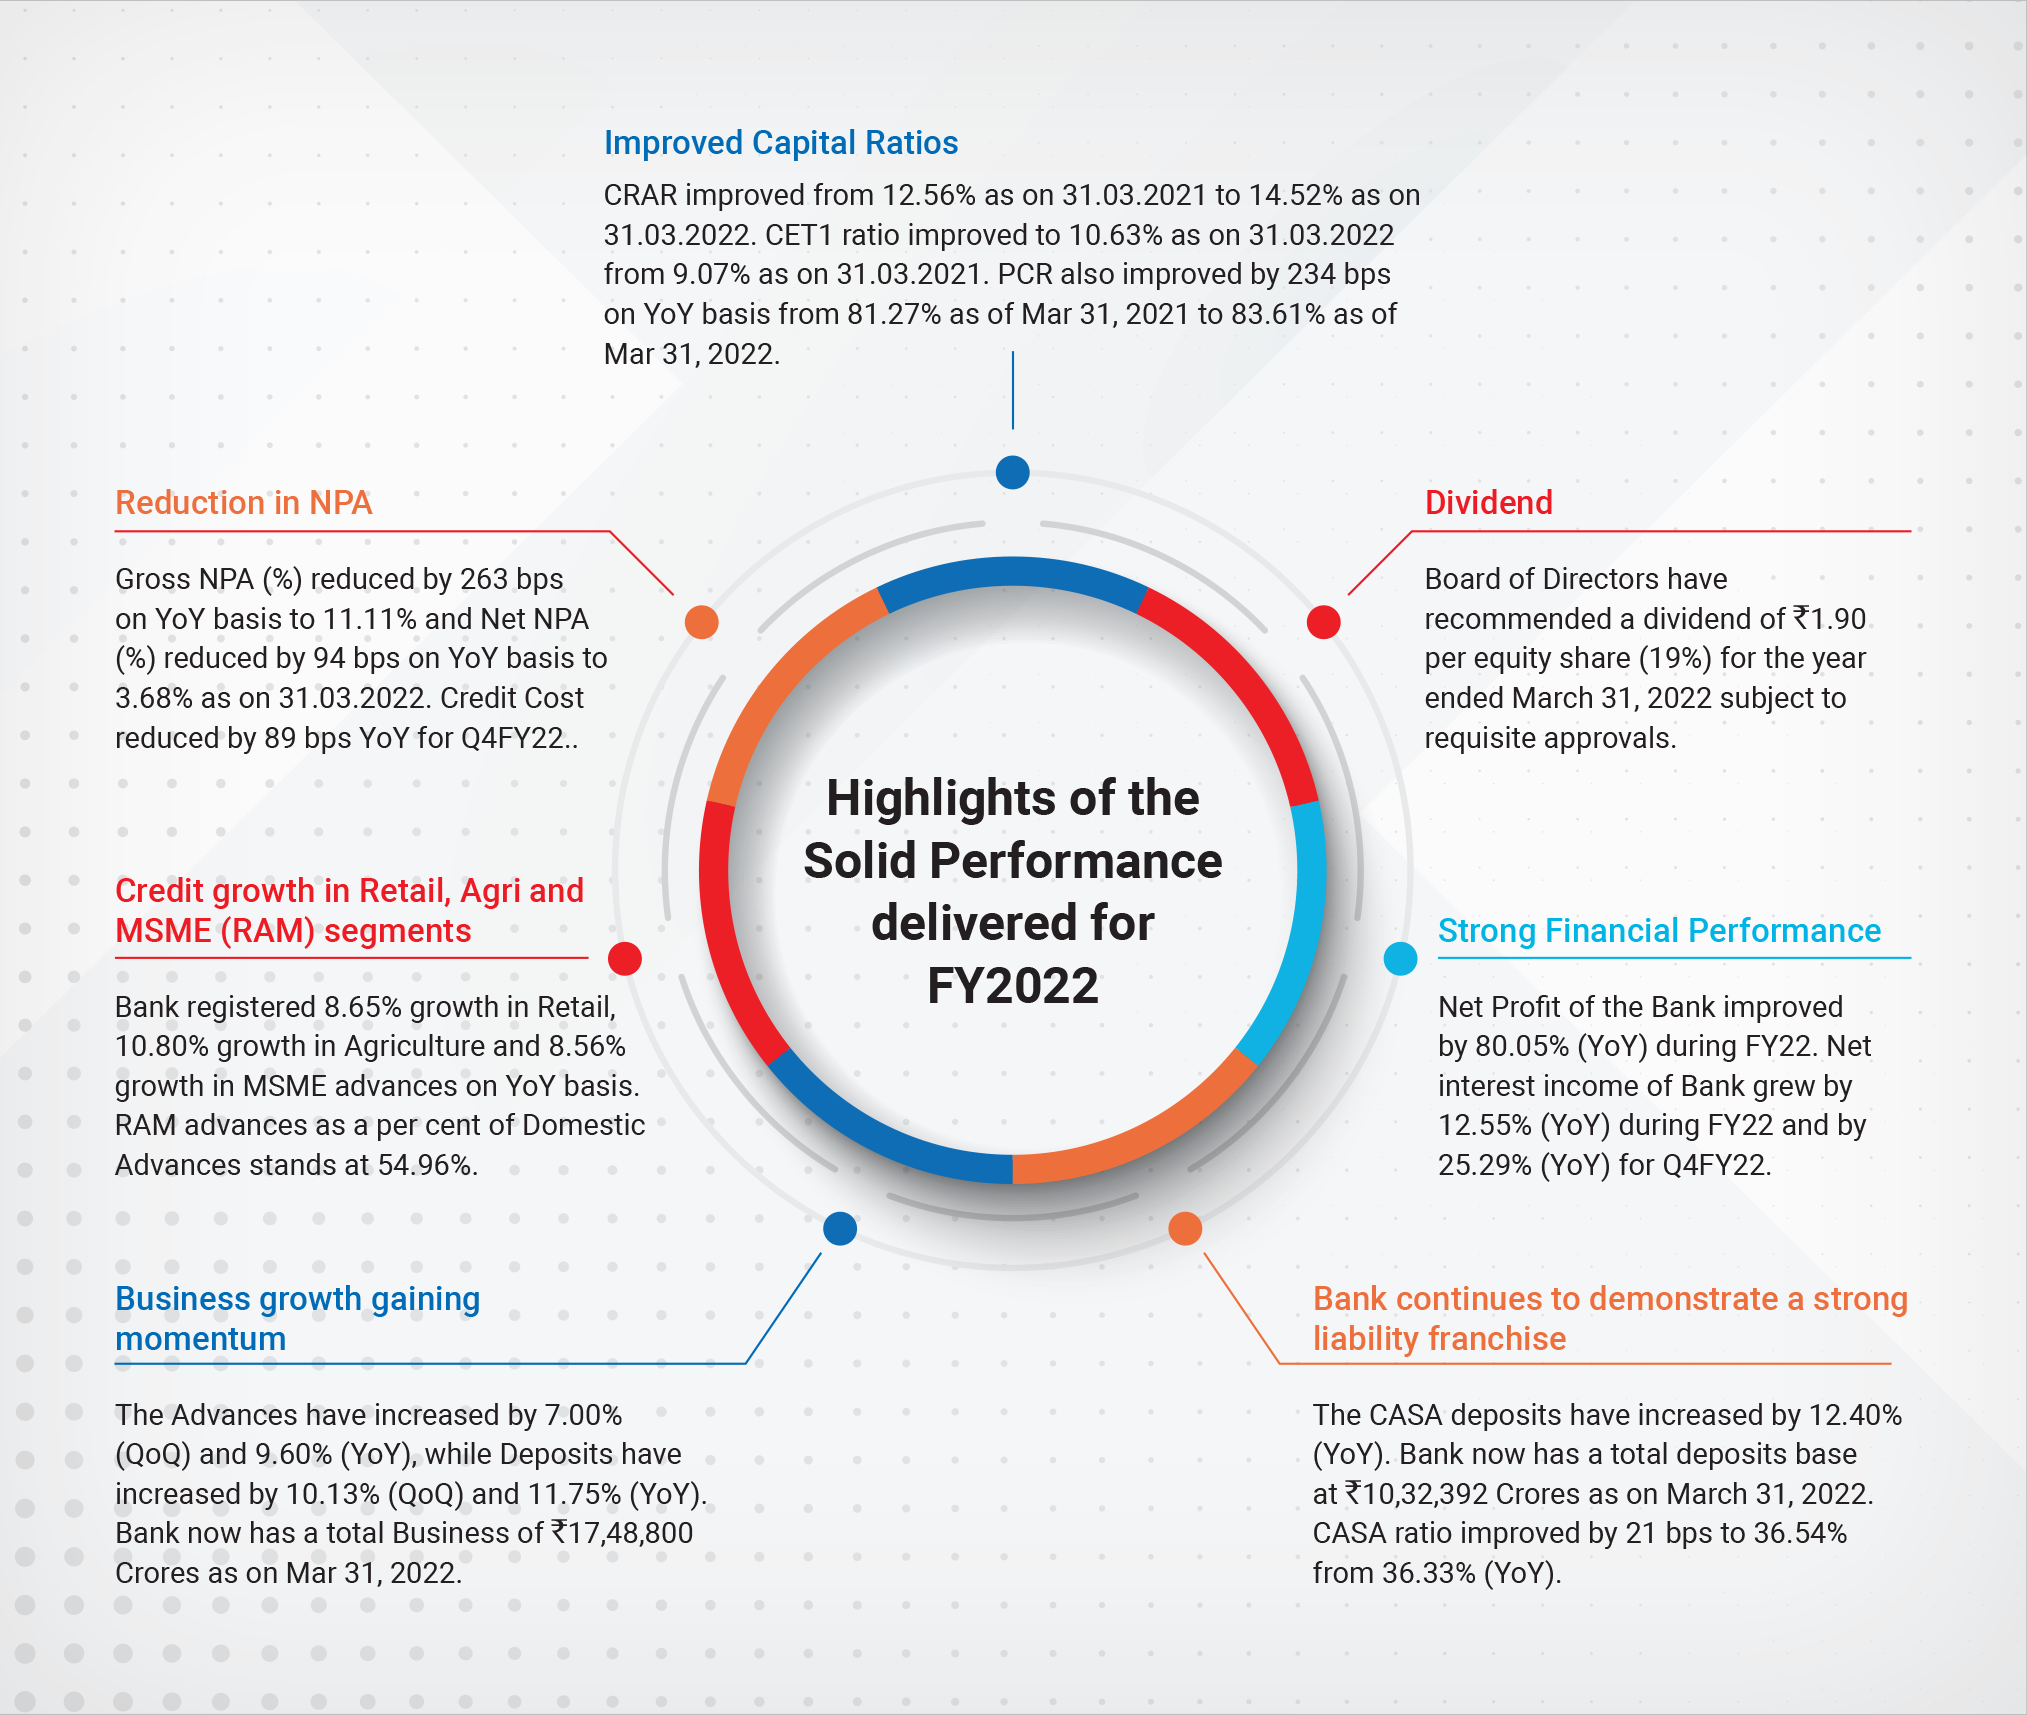 Highlights of the solid performance delivered for FY2022